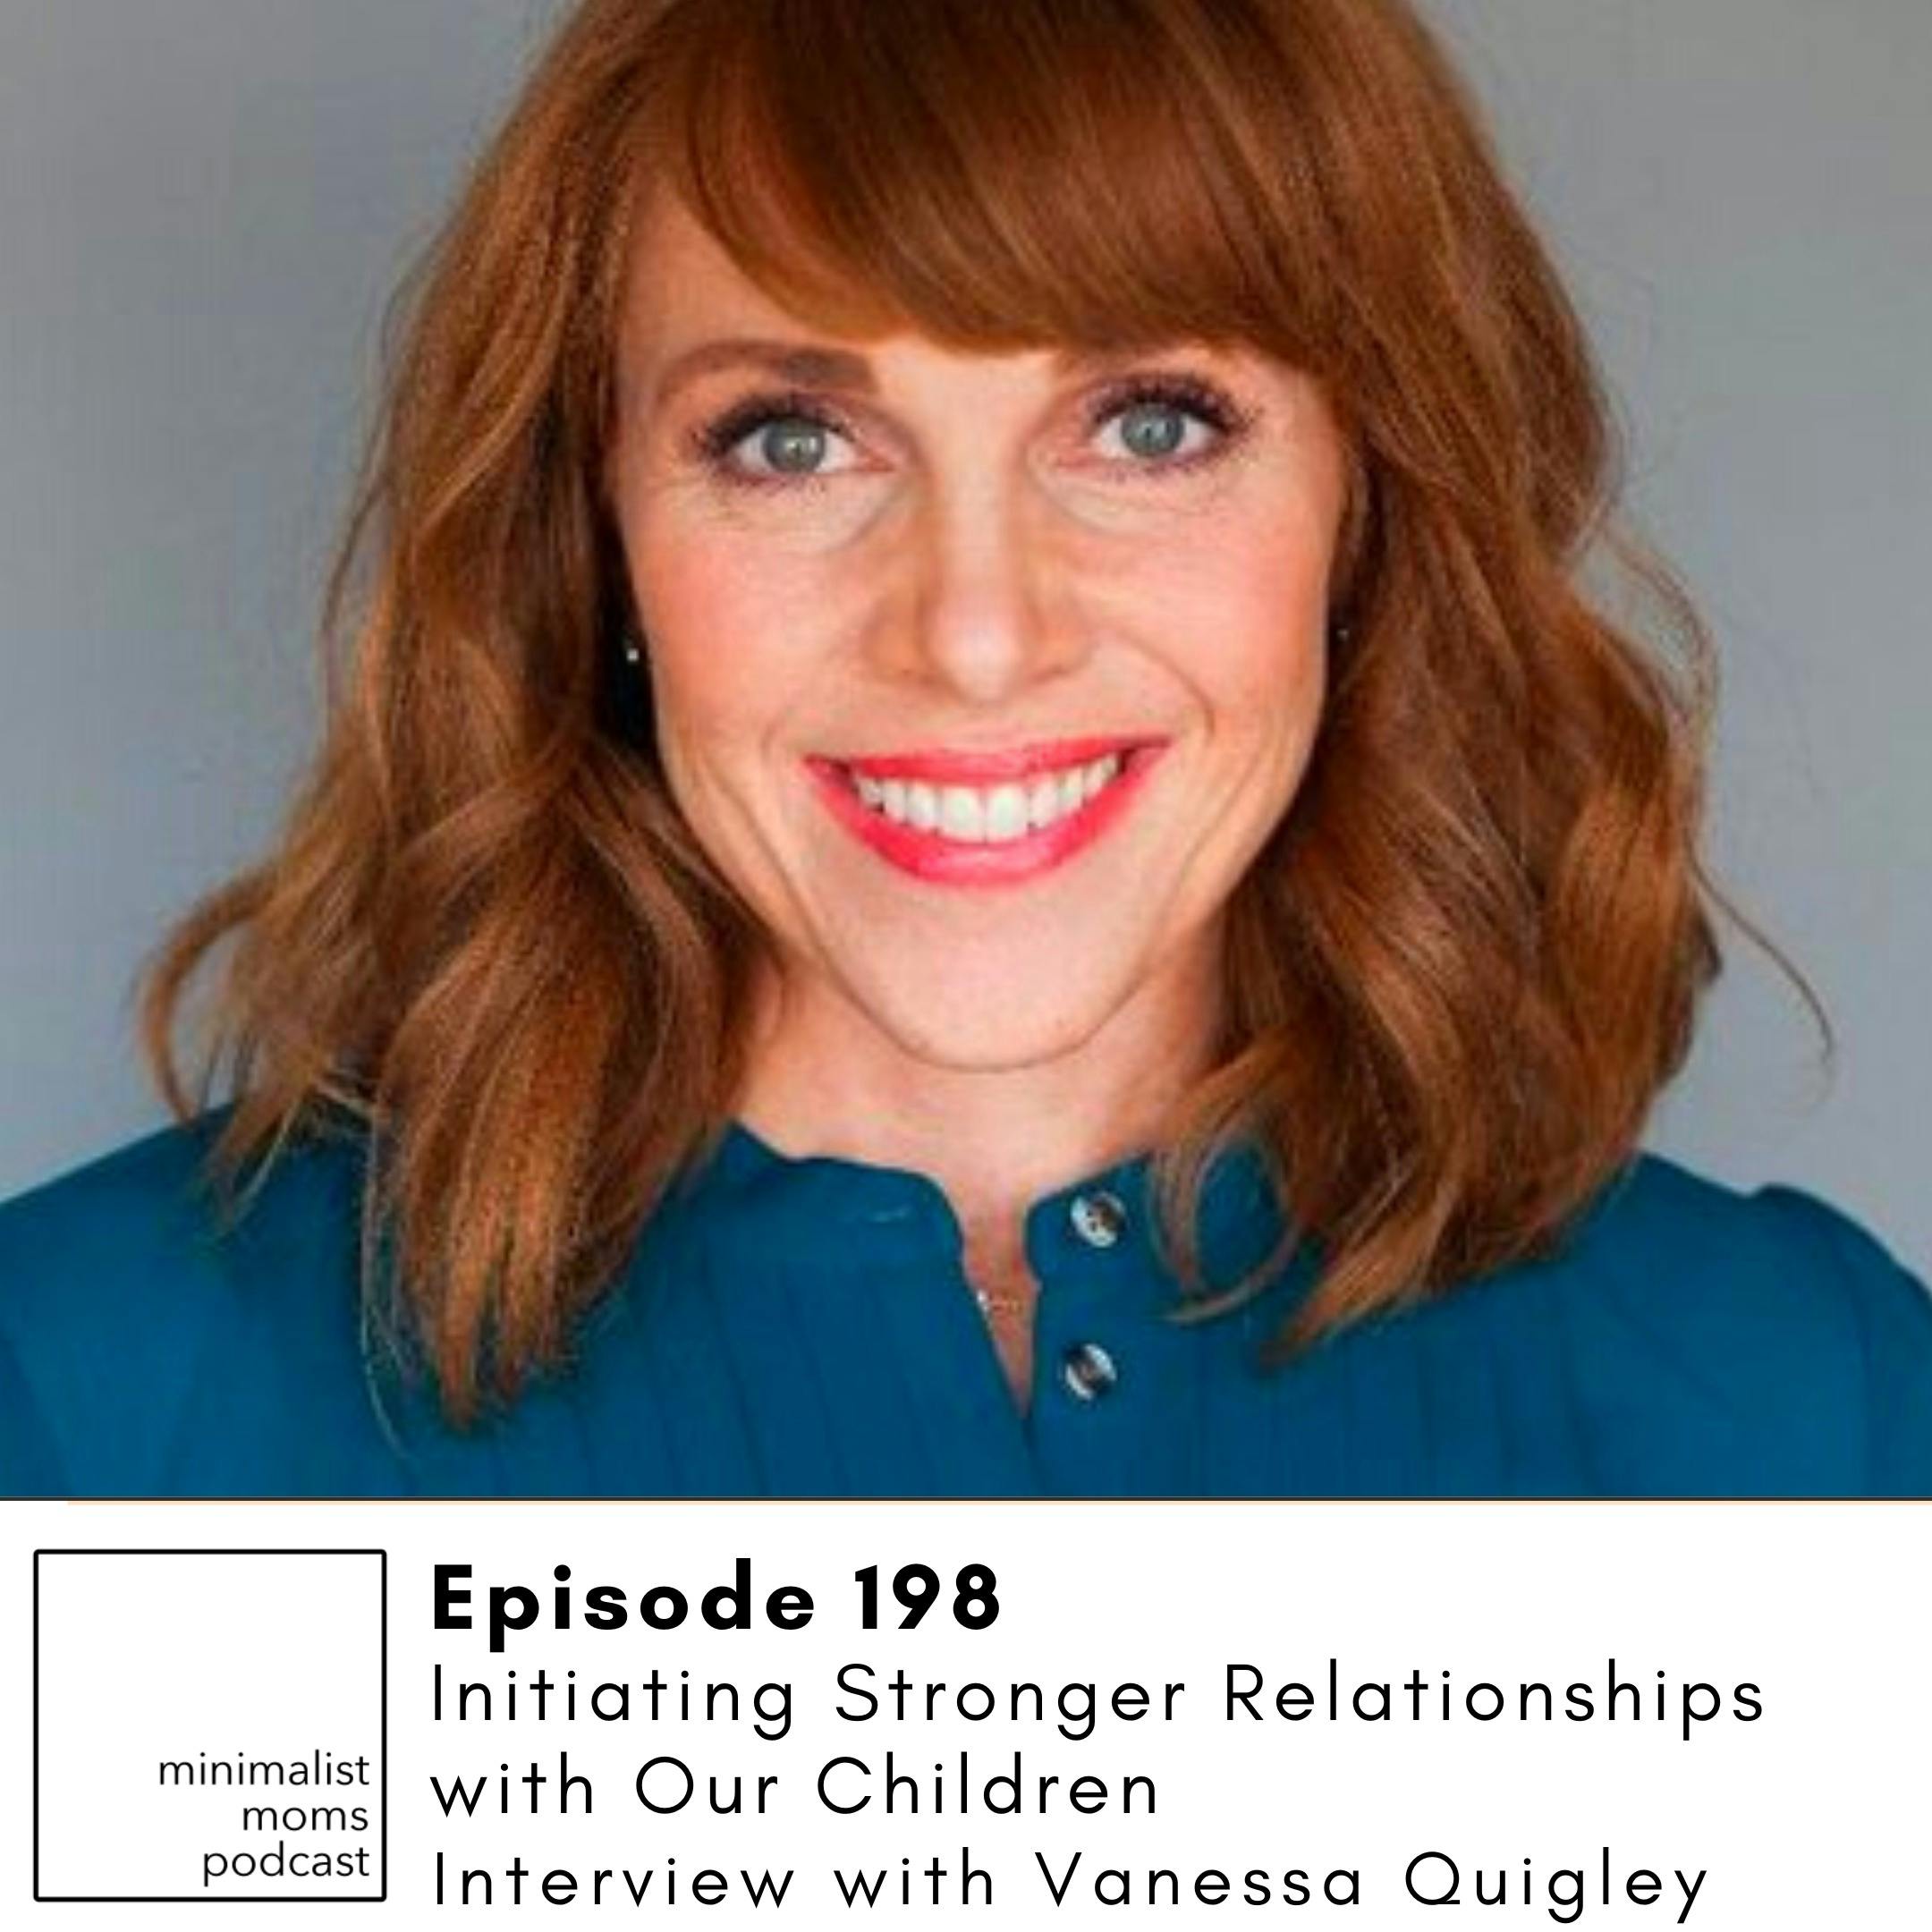 EP198: Initiating Stronger Relationships with Our Children with Vanessa Quigley